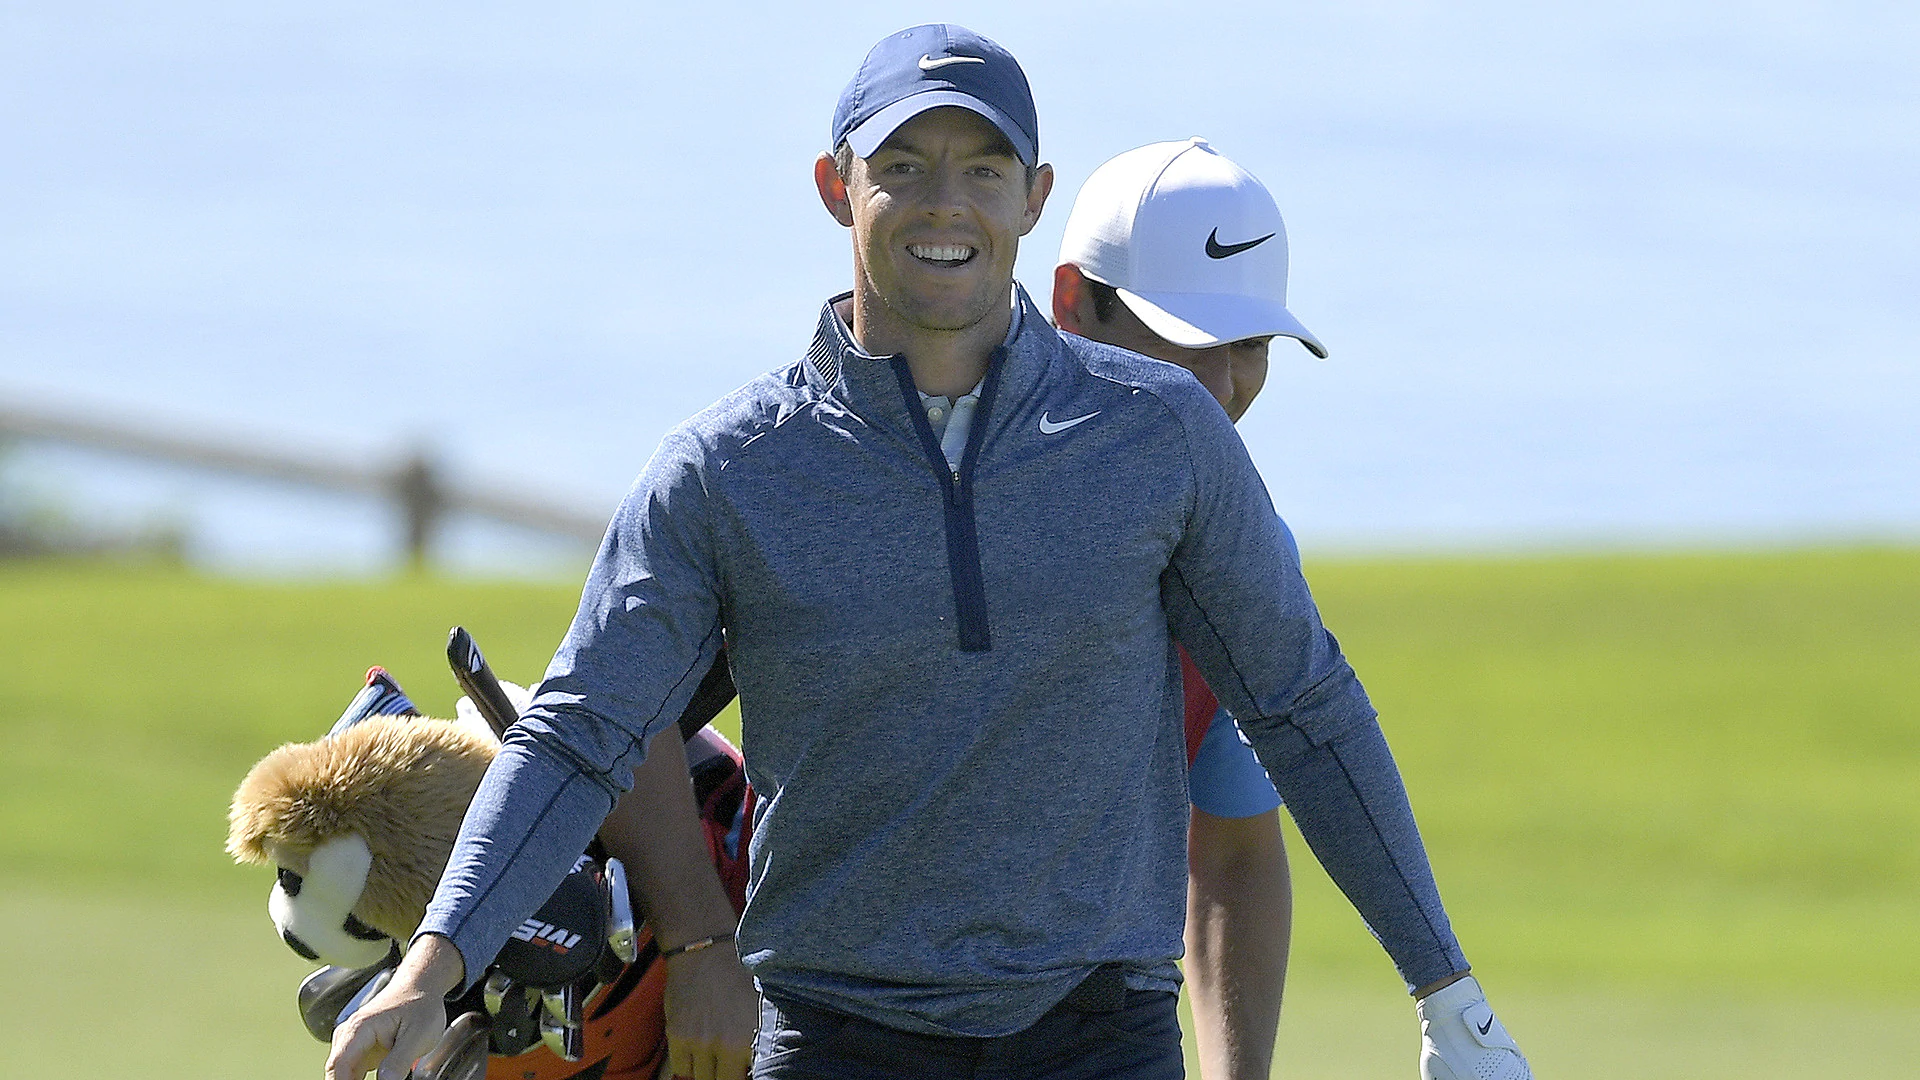 Watch: McIlroy one-hops in second eagle of the day at Farmers